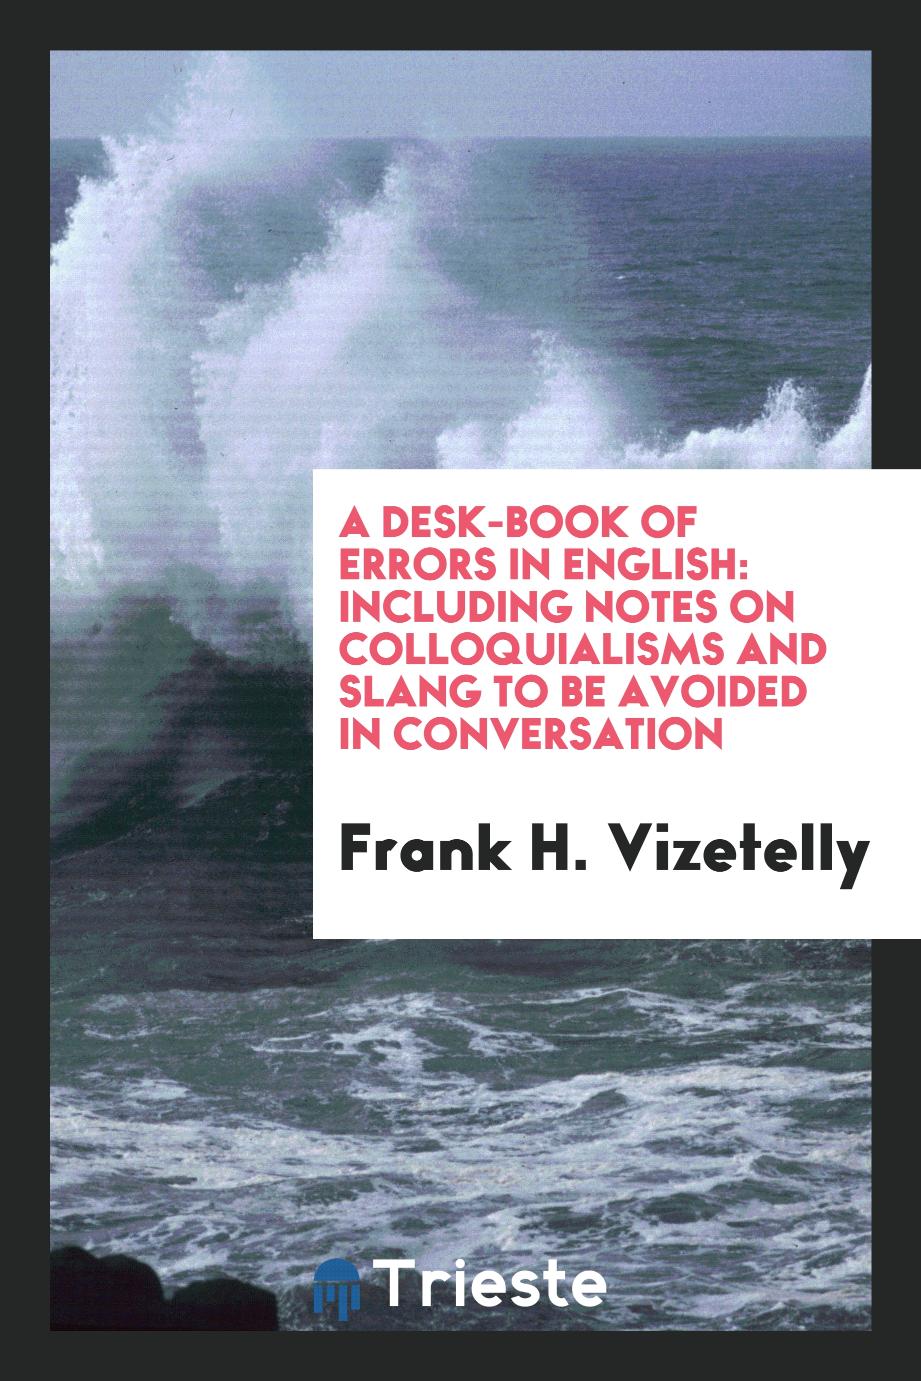 A desk-book of errors in English: including notes on colloquialisms and slang to be avoided in conversation